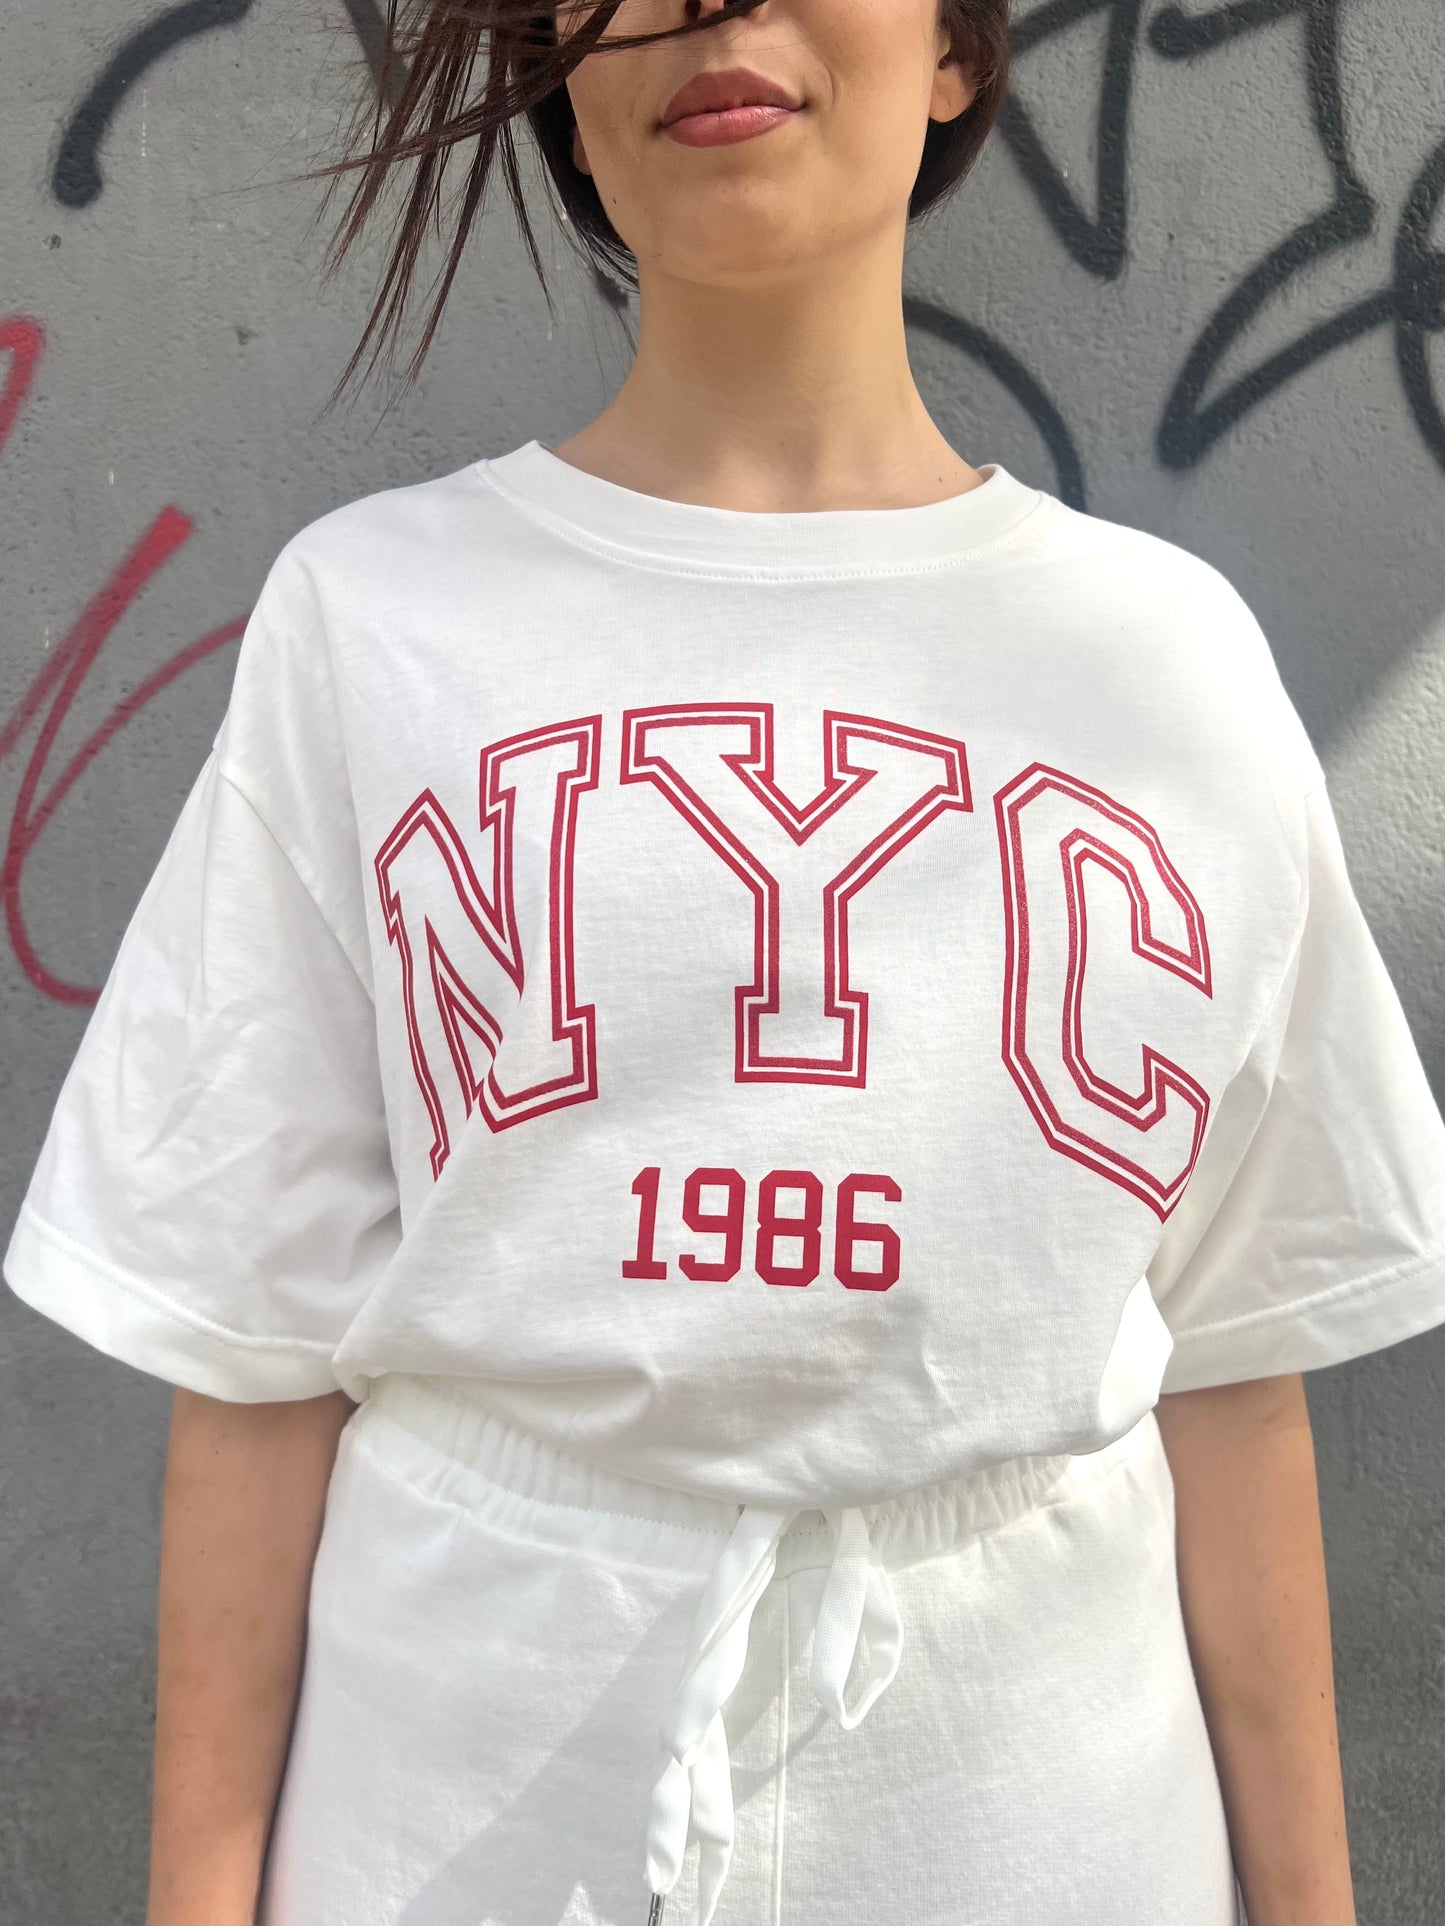 SUSY MIX T-SHIRT OVER NYC 1886 PANNA